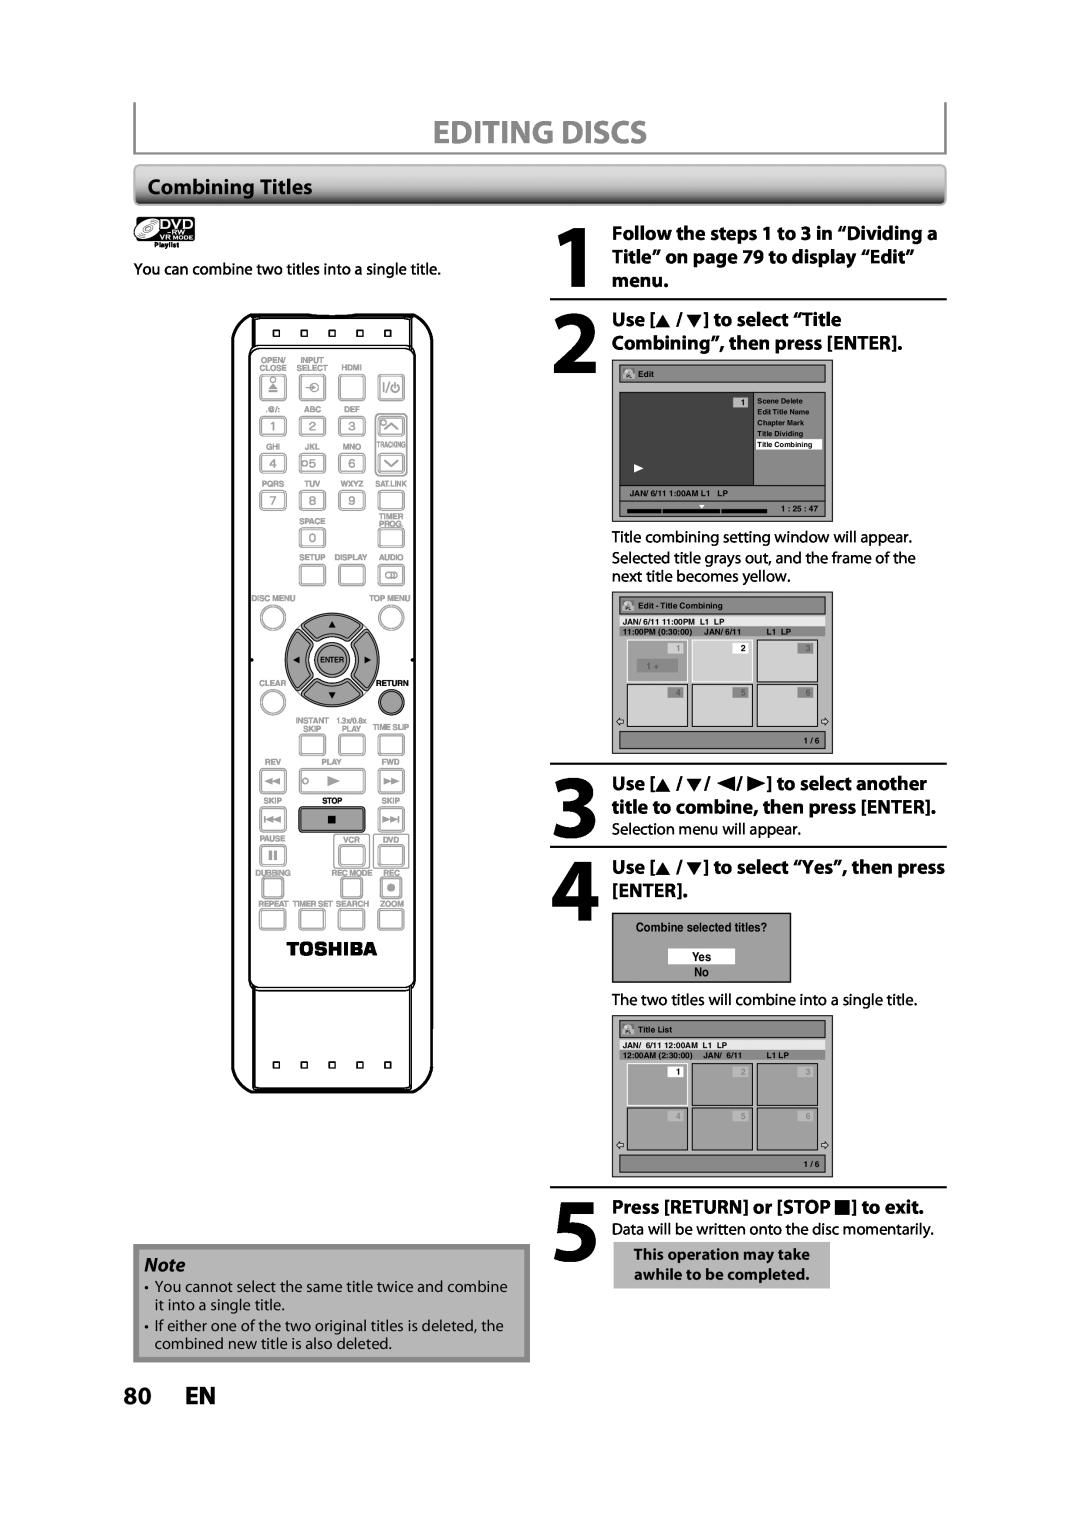 Toshiba DVR620KC 80 EN, Combining Titles, Follow the steps 1 to 3 in “Dividing a, Title” on page 79 to display “Edit” menu 